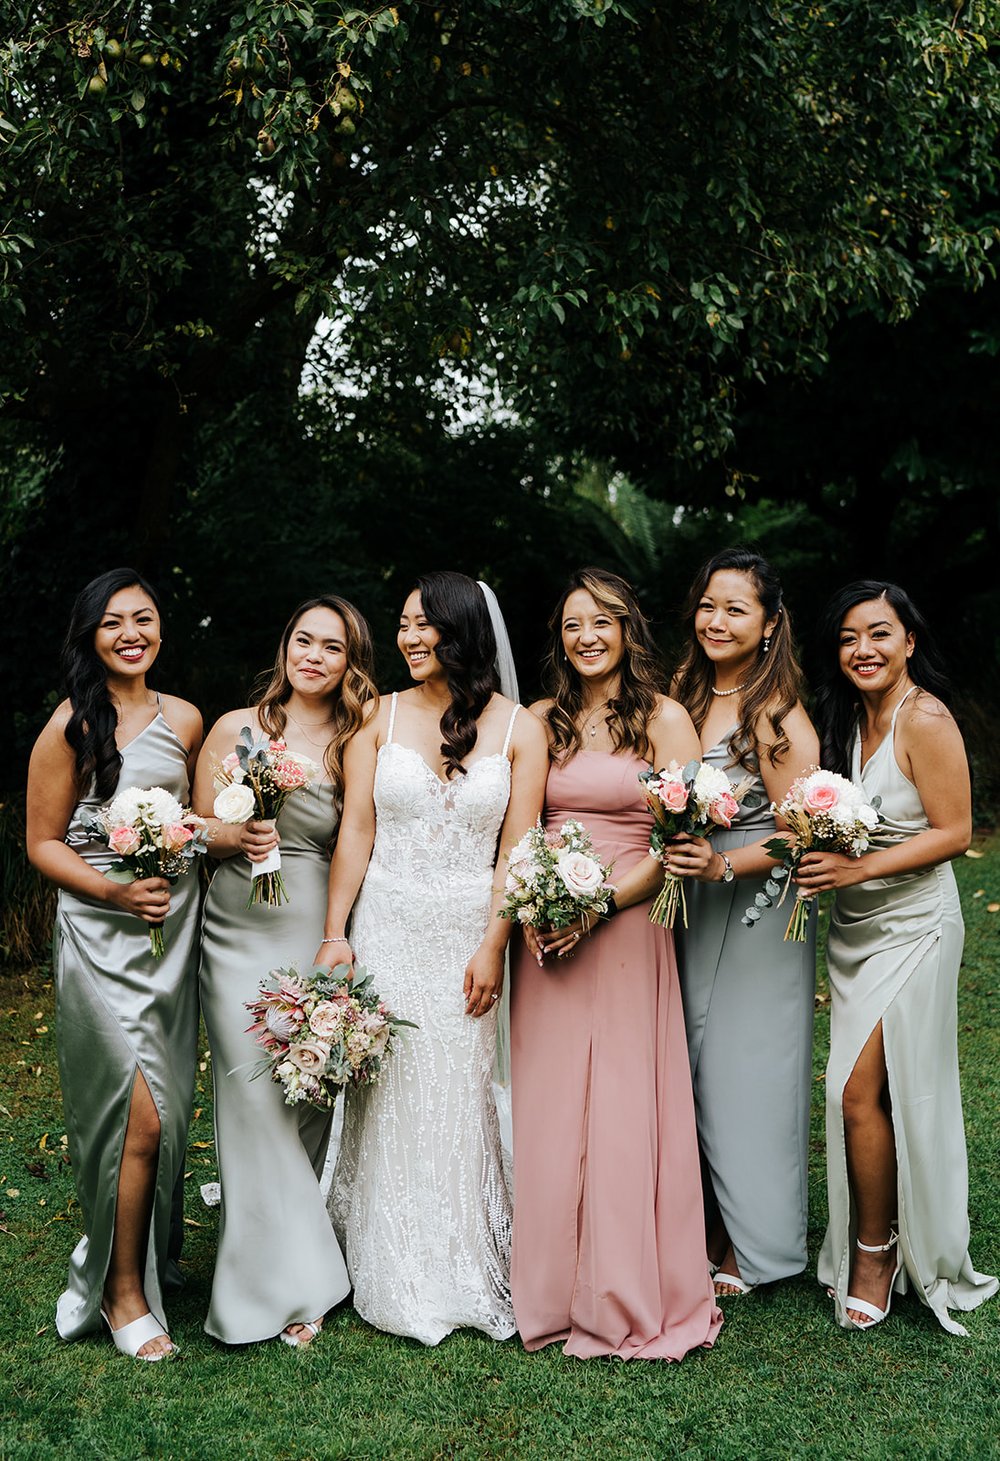 Staged group photograph of bride and her bridesmaids